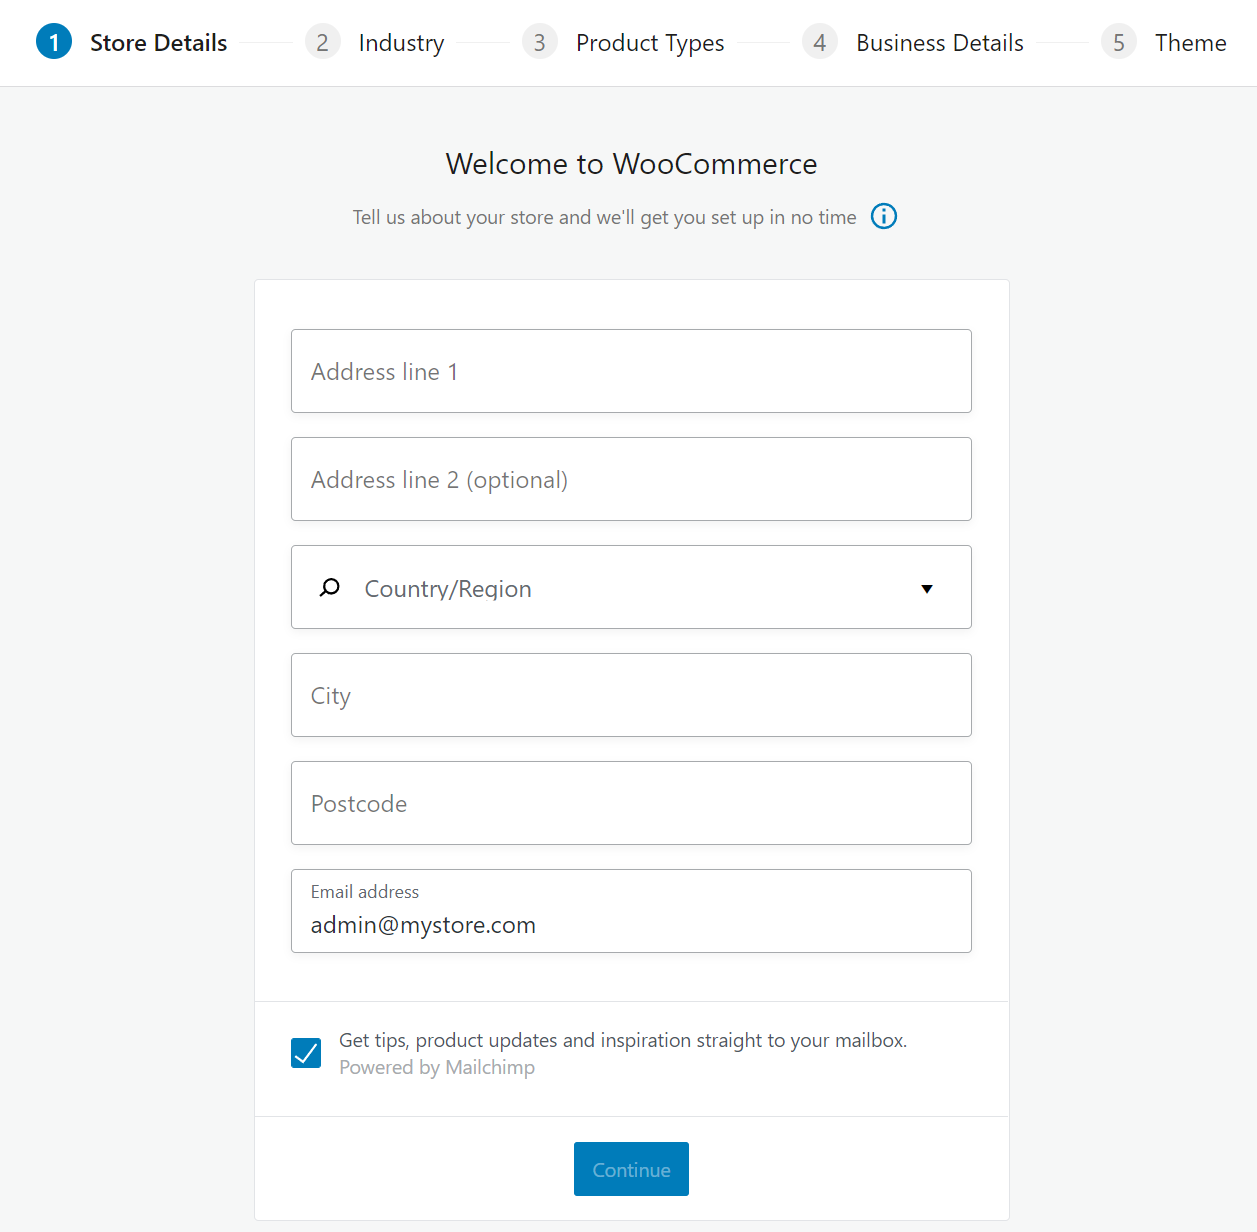 Configuring your WooCommerce store details